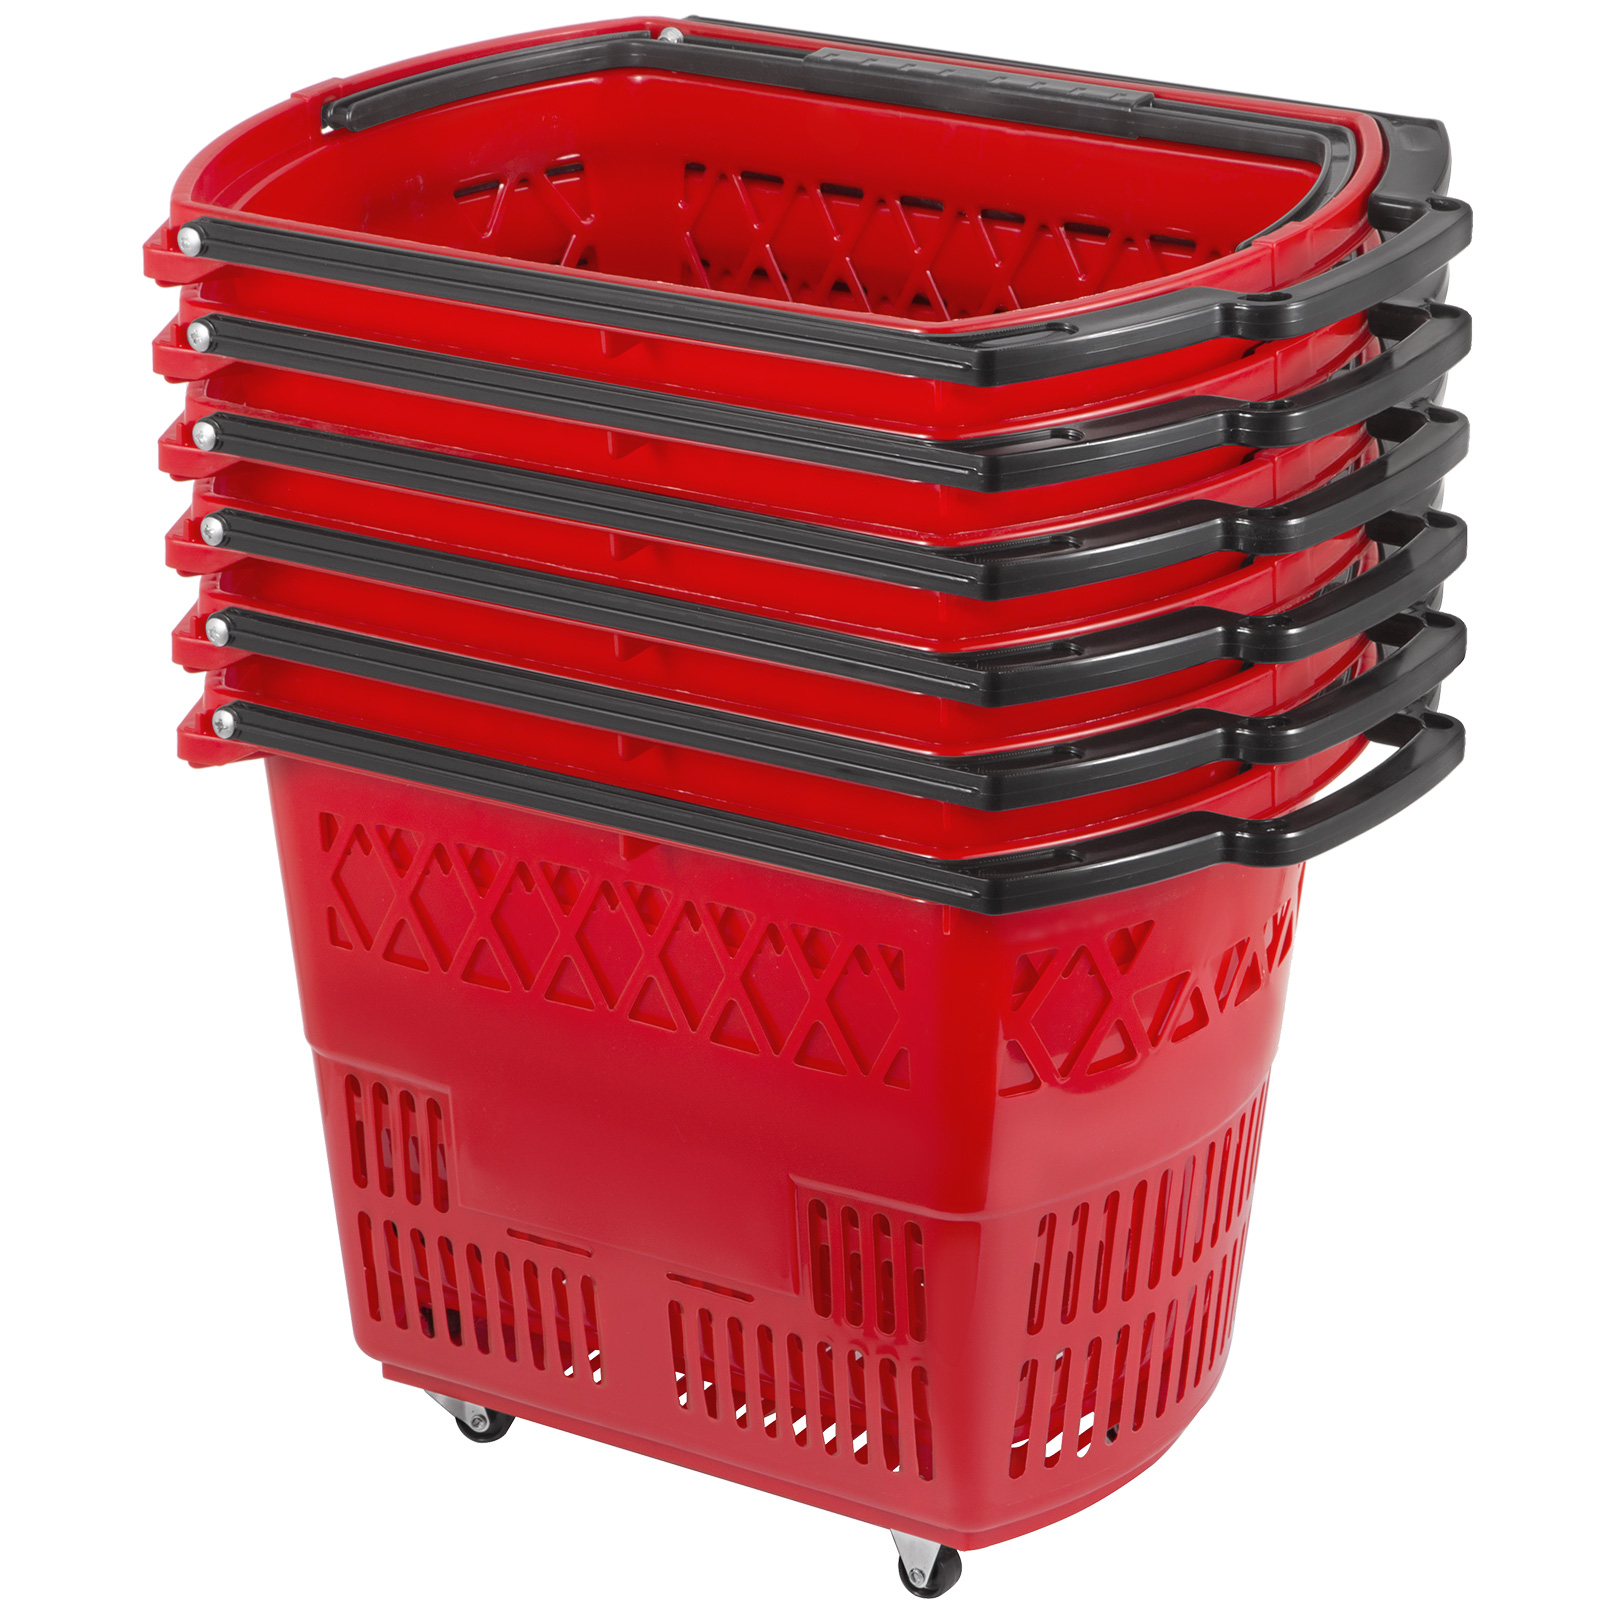 6pcs Red Shopping Basket 21x13.2x14.3in Plastic Supermarket Metal Handles Hot от Vevor Many GEOs